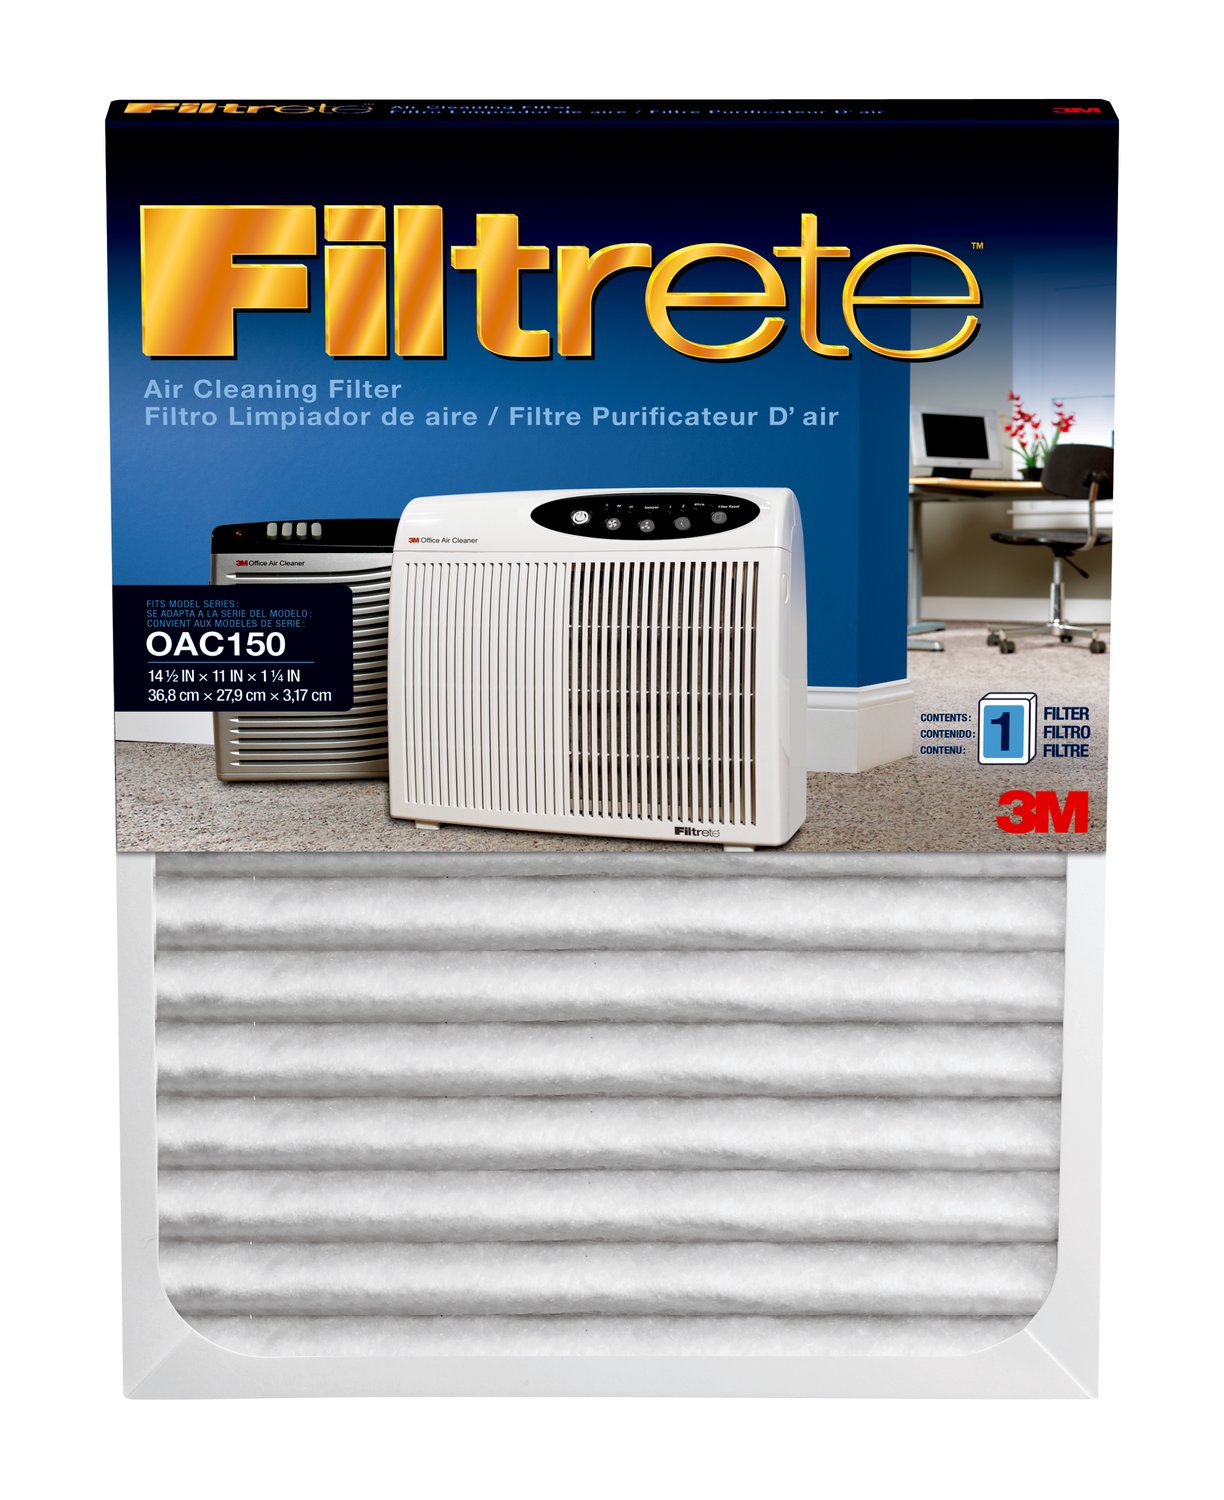 7000126907 - Filtrete Replacement Filter OAC150RF for OAC150 Office Air Cleaner